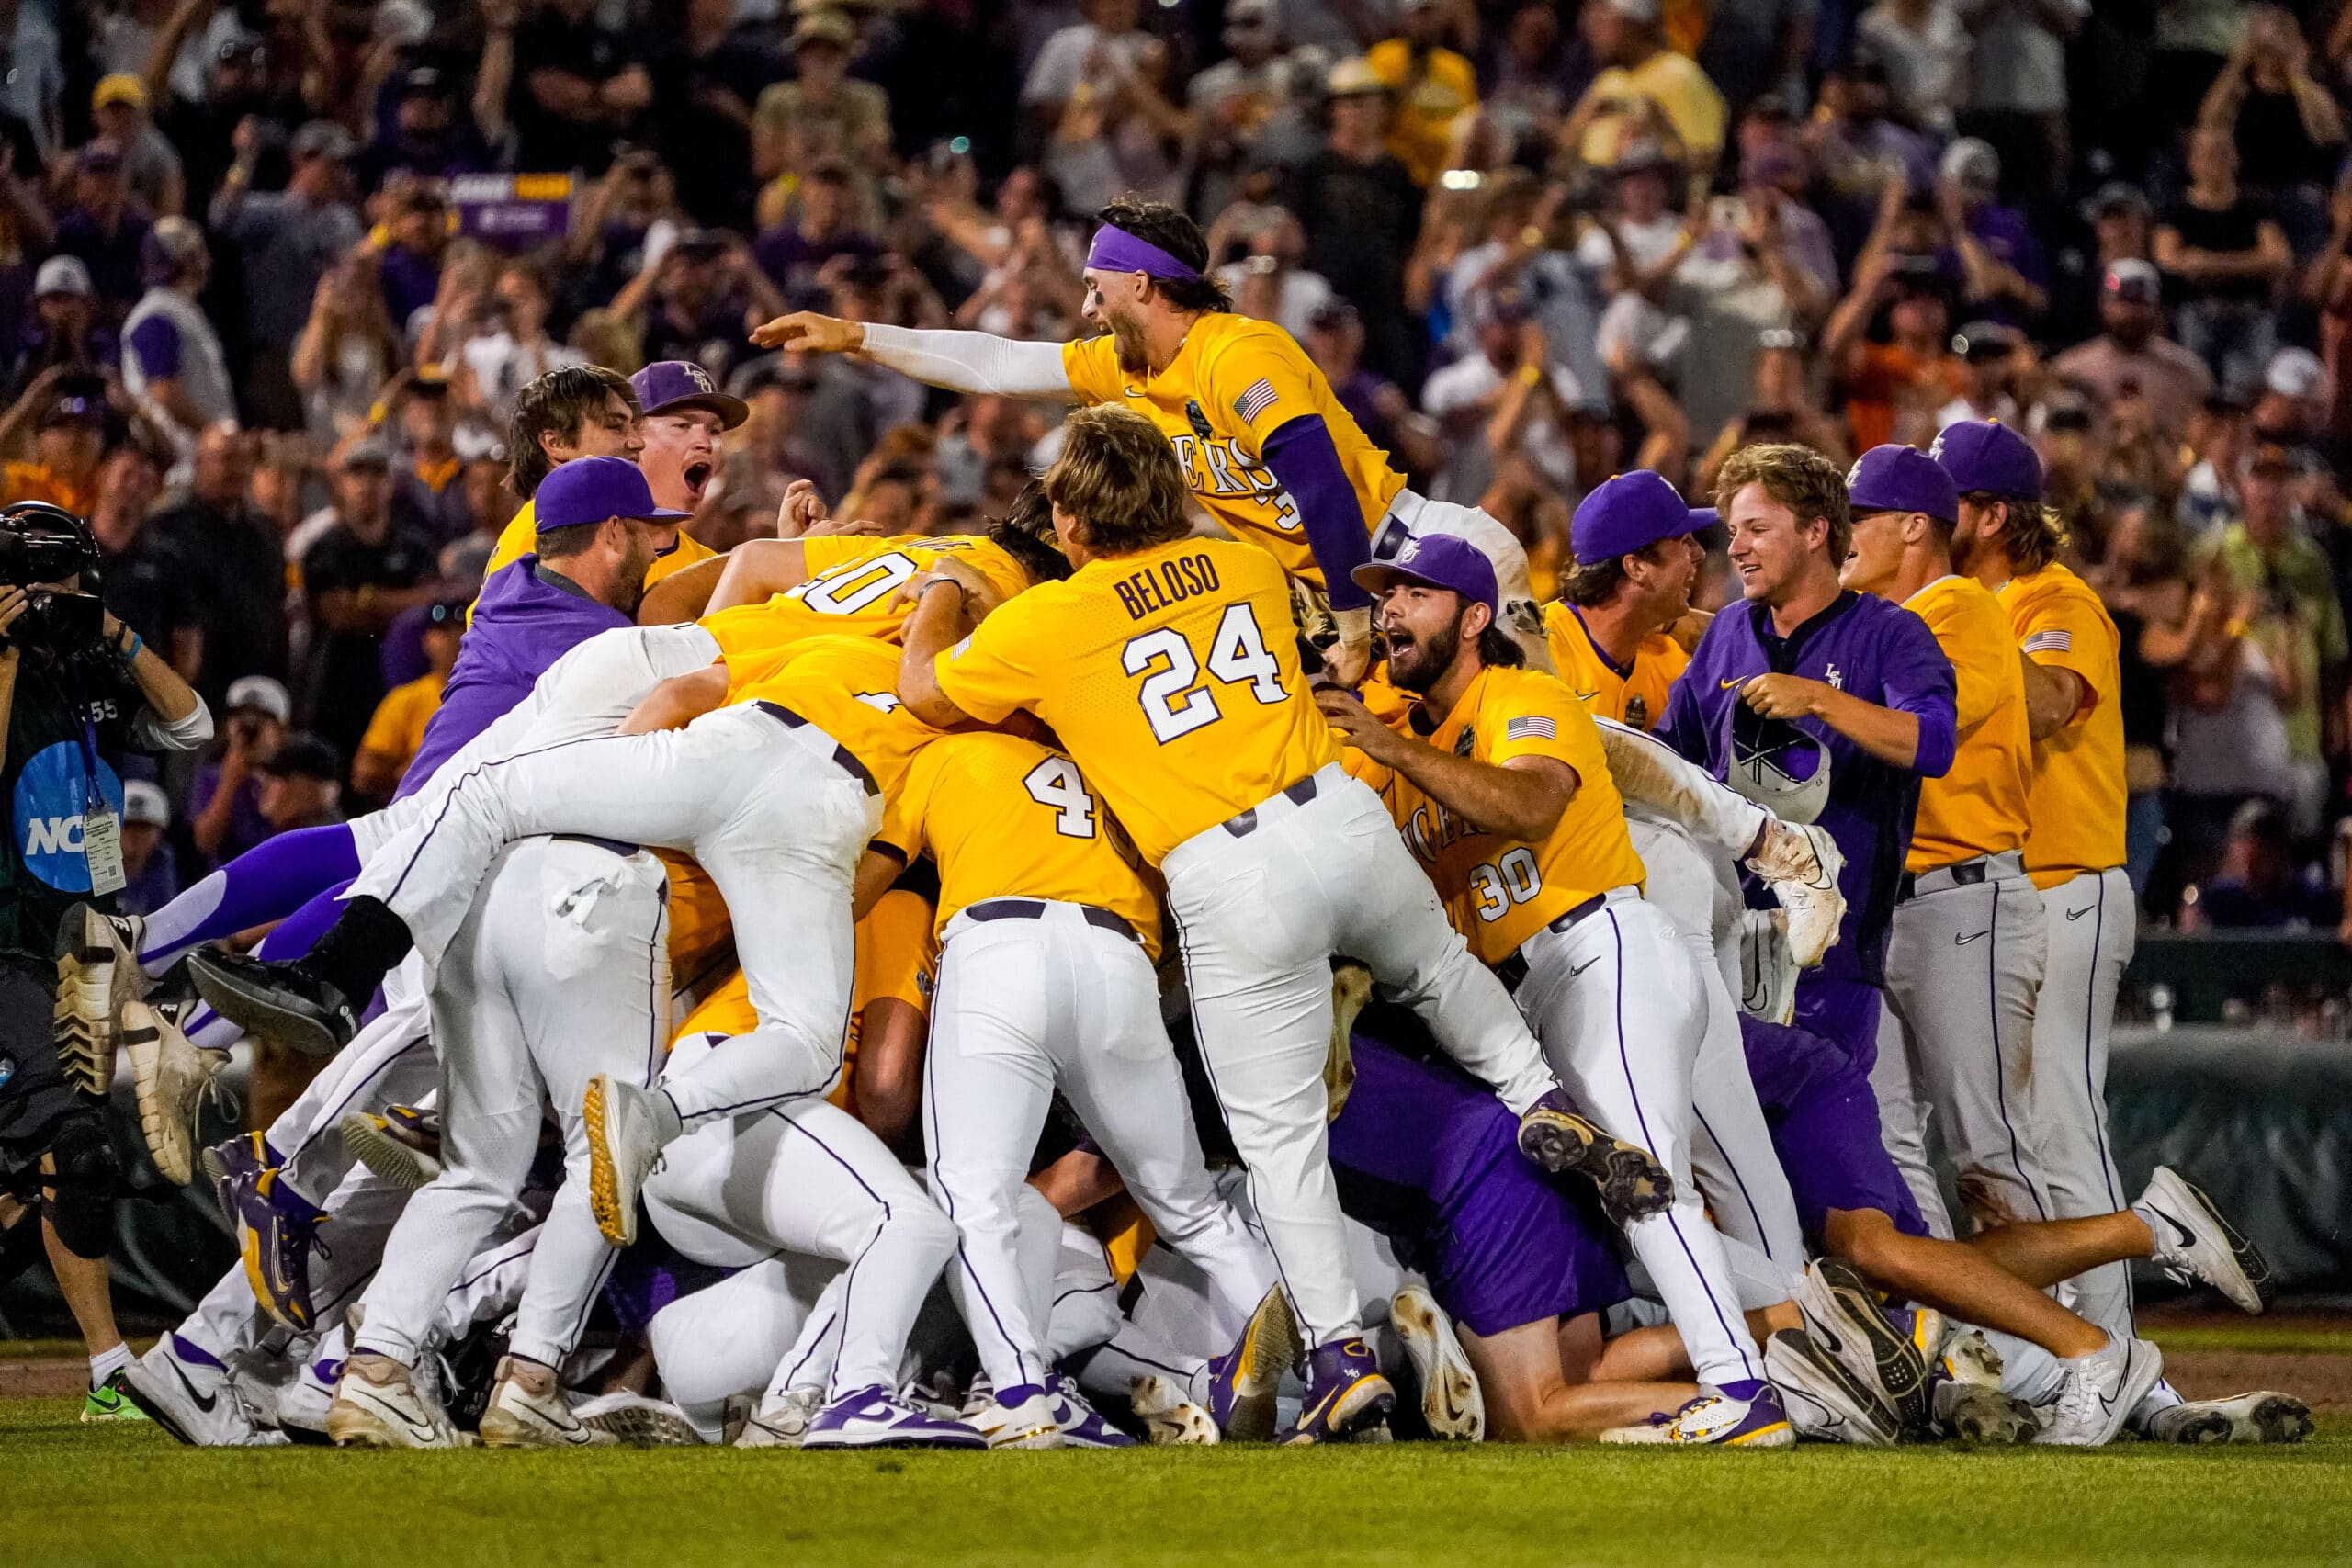 RecordSetting Crowds Watch LSU Claim Seventh CWS Crown